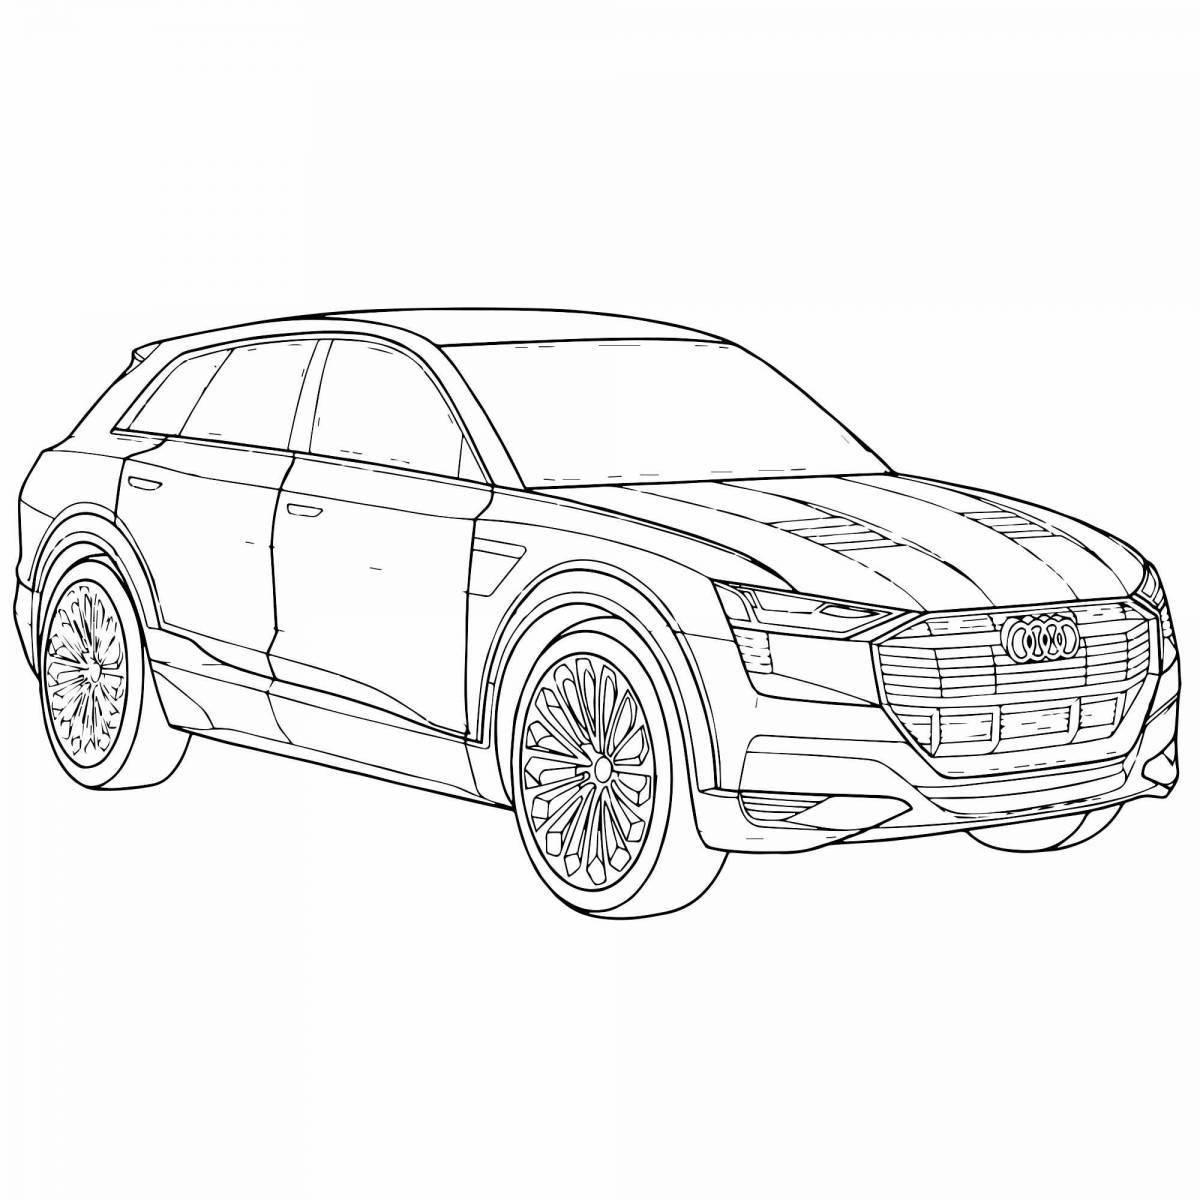 Amazing audi a8 coloring page